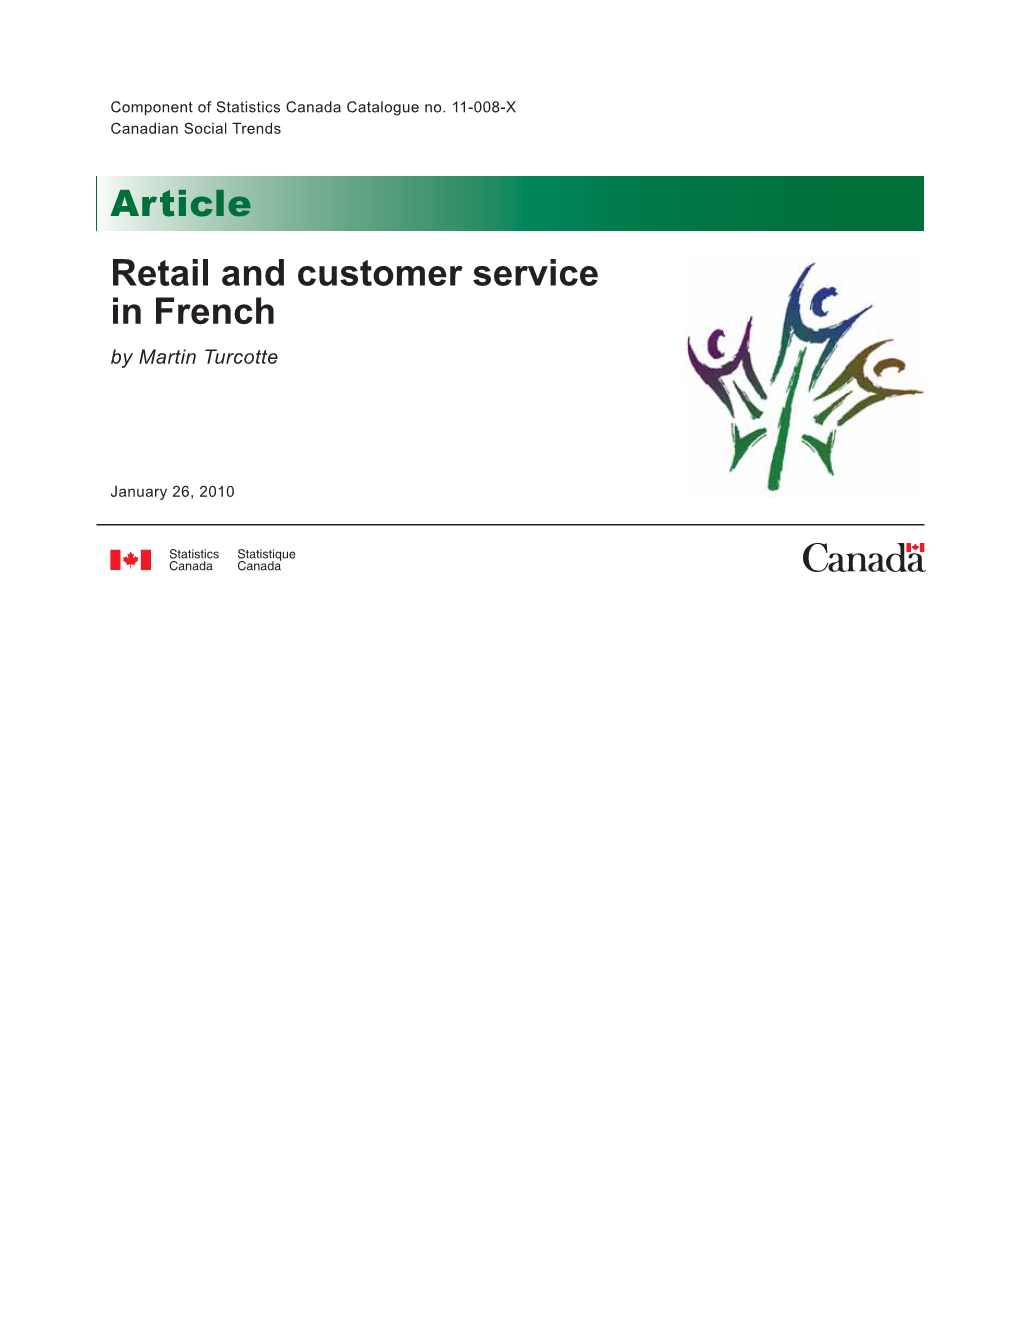 Retail and Customer Service in French by Martin Turcotte